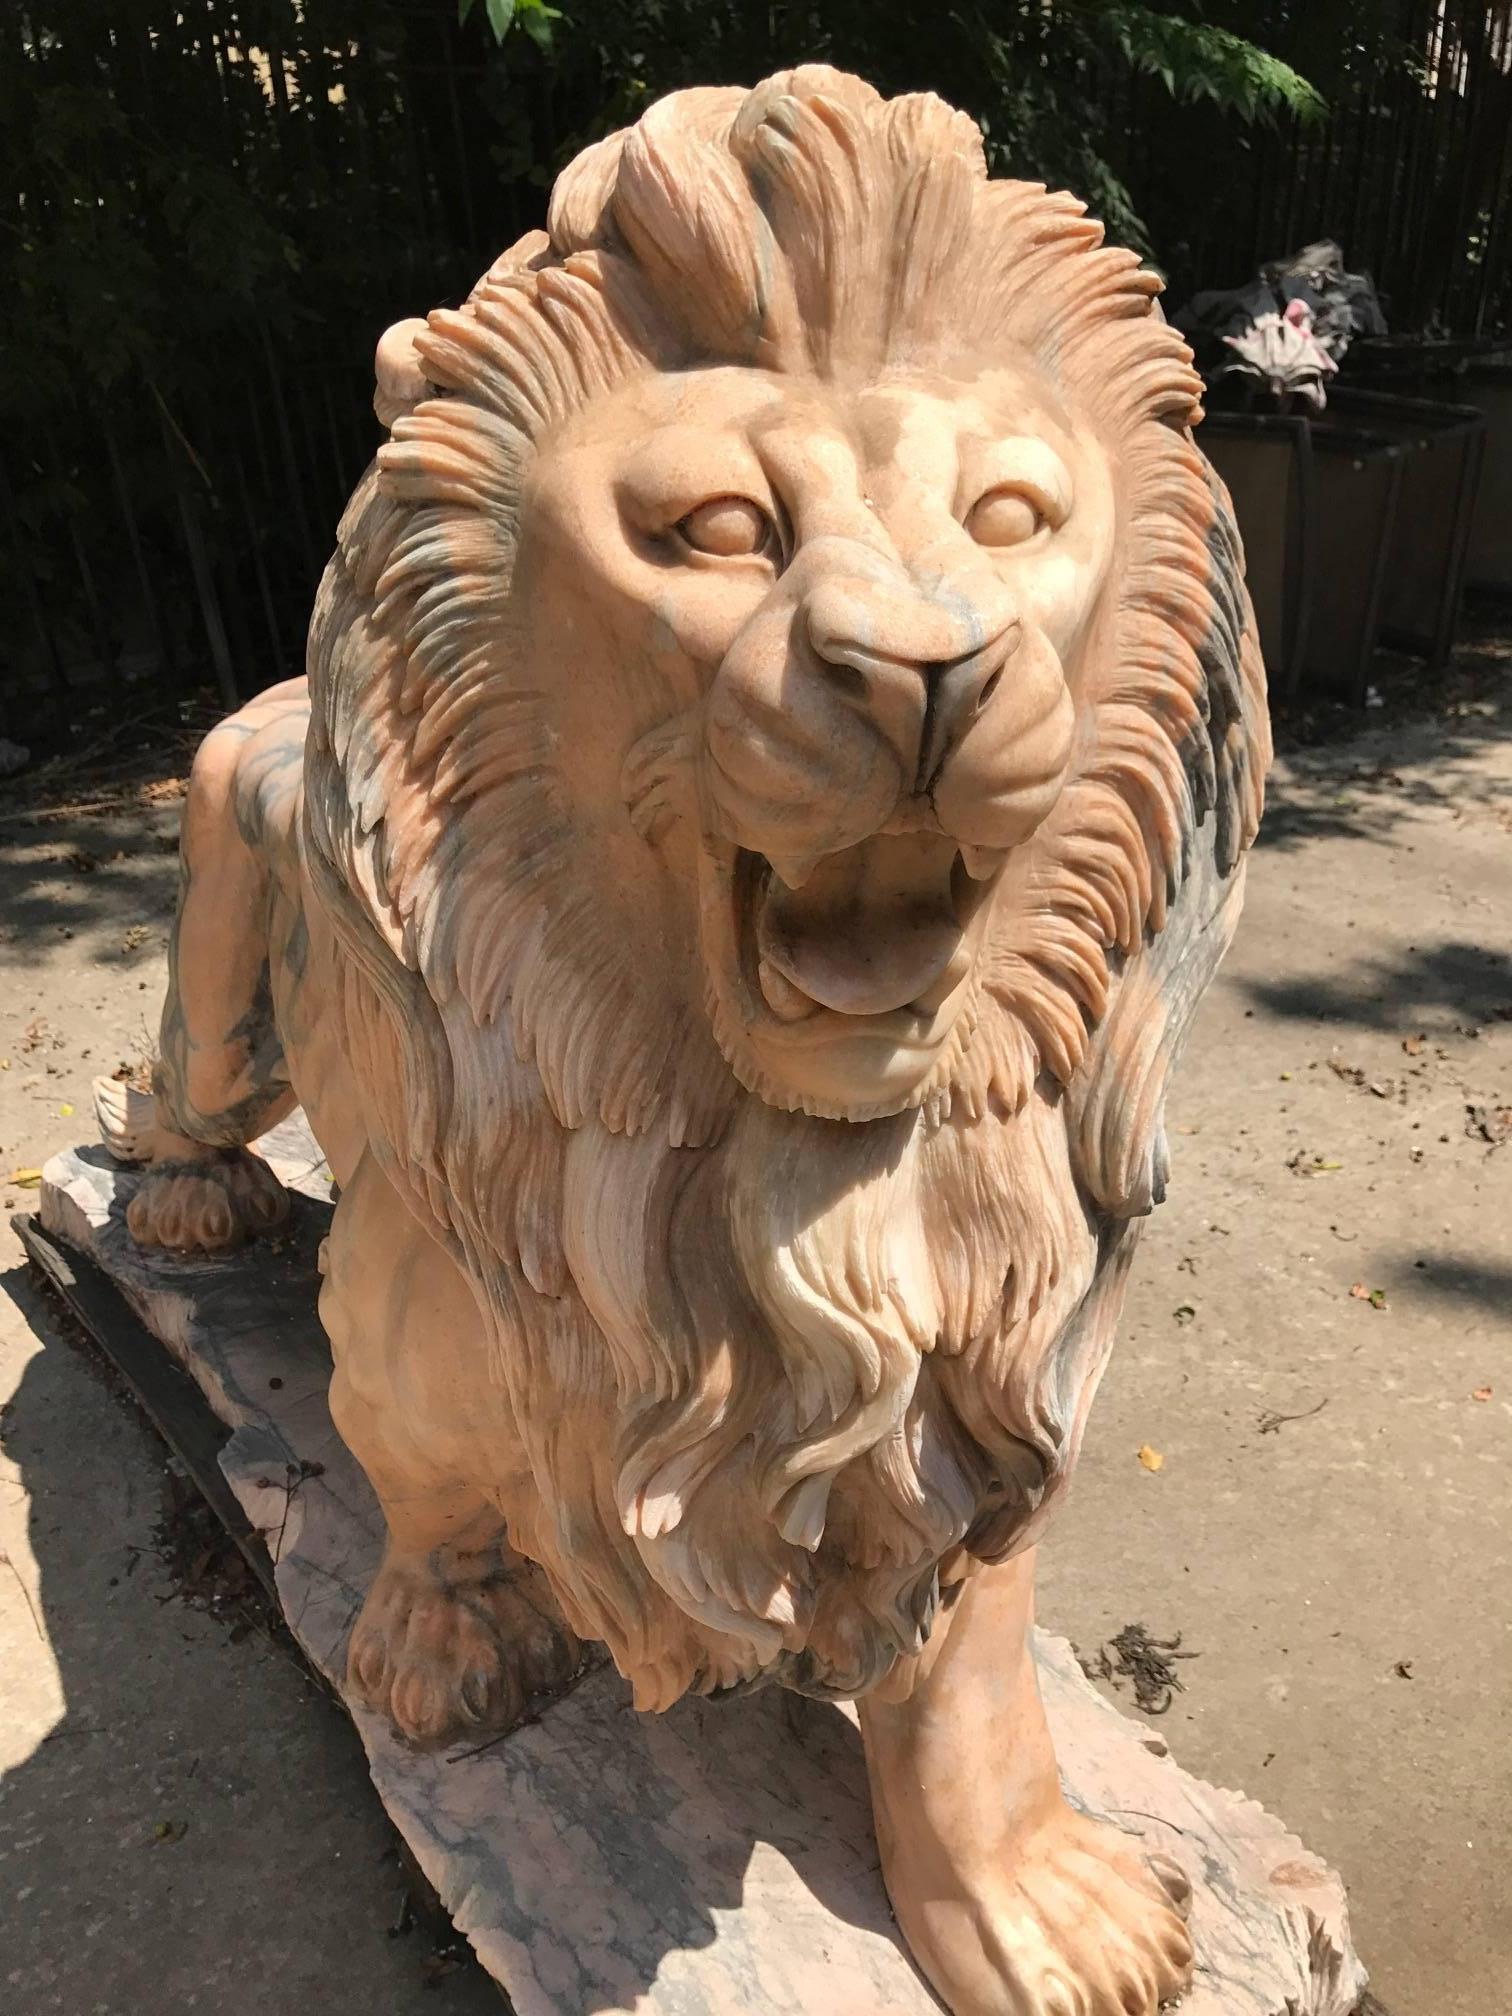 Important pair of Classical hand-carved solid marble lion sculptures of palatial size. The amazing attention to detail make these lions remarkably life-like. The lion sculptures are approximately 45 to 50 years old. The lions are suitable for both